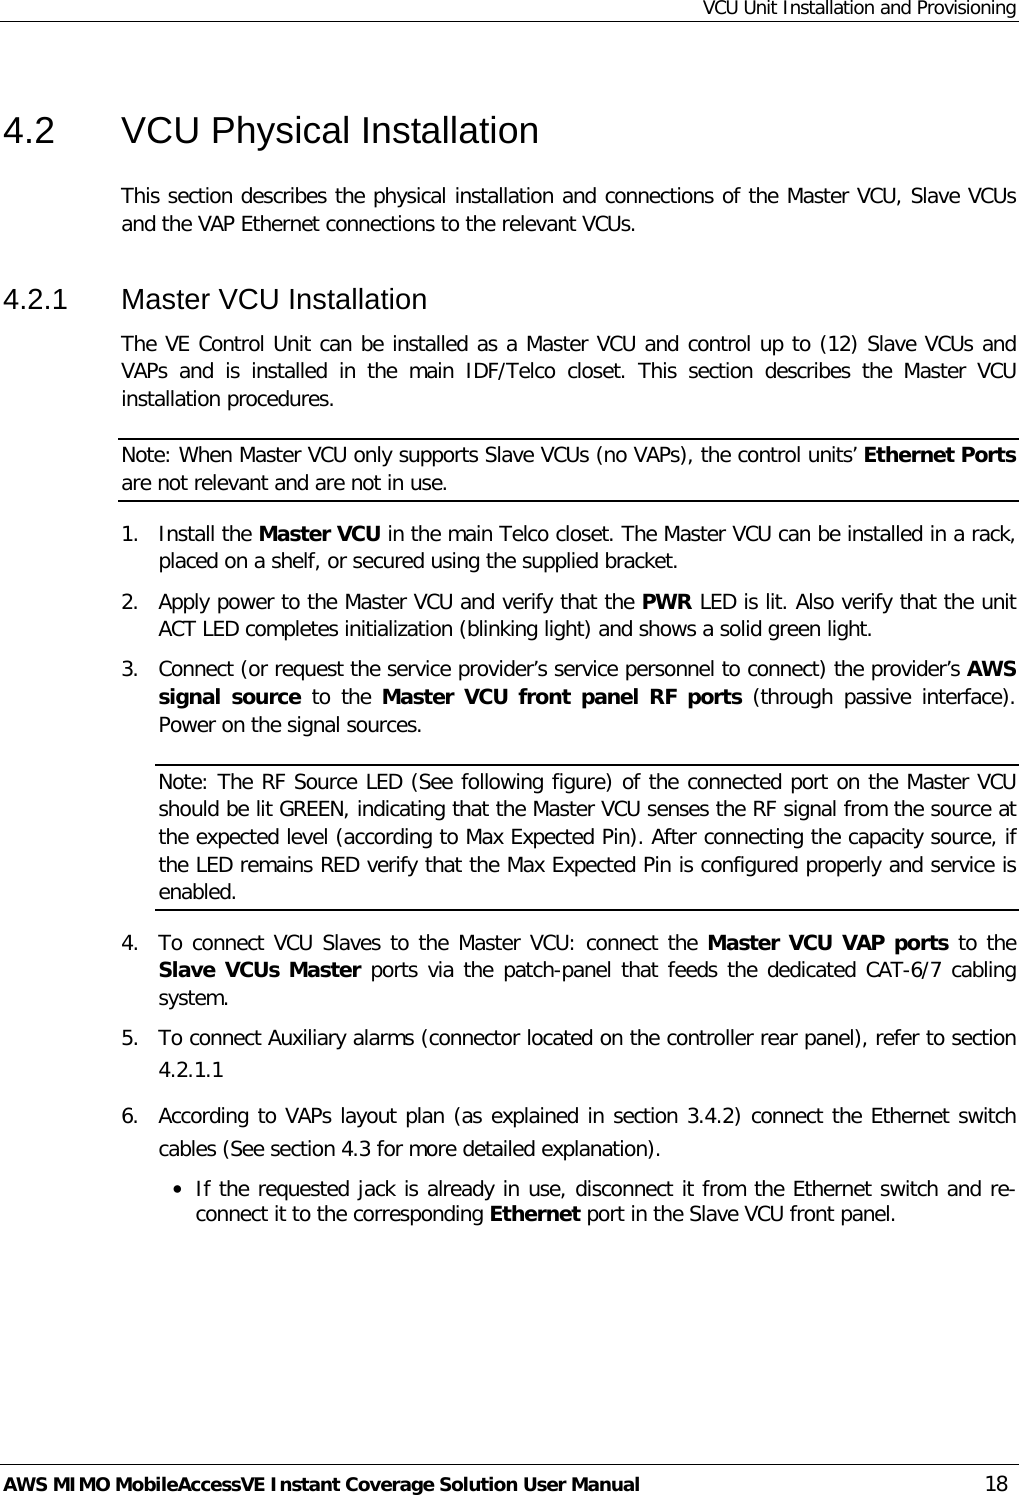 VCU Unit Installation and Provisioning AWS MIMO MobileAccessVE Instant Coverage Solution User Manual  18 4.2  VCU Physical Installation This section describes the physical installation and connections of the Master VCU, Slave VCUs and the VAP Ethernet connections to the relevant VCUs. 4.2.1  Master VCU Installation The VE Control Unit can be installed as a Master VCU and control up to (12) Slave VCUs and VAPs and is installed in the main IDF/Telco  closet. This section describes the Master VCU installation procedures. Note: When Master VCU only supports Slave VCUs (no VAPs), the control units’ Ethernet Ports are not relevant and are not in use. 1.  Install the Master VCU in the main Telco closet. The Master VCU can be installed in a rack, placed on a shelf, or secured using the supplied bracket. 2.  Apply power to the Master VCU and verify that the PWR LED is lit. Also verify that the unit ACT LED completes initialization (blinking light) and shows a solid green light. 3.  Connect (or request the service provider’s service personnel to connect) the provider’s AWS signal source to the Master VCU front panel RF ports (through passive interface). Power on the signal sources. Note: The RF Source LED (See following figure) of the connected port on the Master VCU should be lit GREEN, indicating that the Master VCU senses the RF signal from the source at the expected level (according to Max Expected Pin). After connecting the capacity source, if the LED remains RED verify that the Max Expected Pin is configured properly and service is enabled. 4.  To connect VCU Slaves to the Master VCU: connect the Master VCU VAP ports to the Slave VCUs Master ports via the patch-panel that feeds the dedicated CAT-6/7 cabling system. 5.  To connect Auxiliary alarms (connector located on the controller rear panel), refer to section  4.2.1.1  6.  According to VAPs layout plan (as explained in section  3.4.2) connect the Ethernet switch cables (See section  4.3 for more detailed explanation). • If the requested jack is already in use, disconnect it from the Ethernet switch and re-connect it to the corresponding Ethernet port in the Slave VCU front panel. 